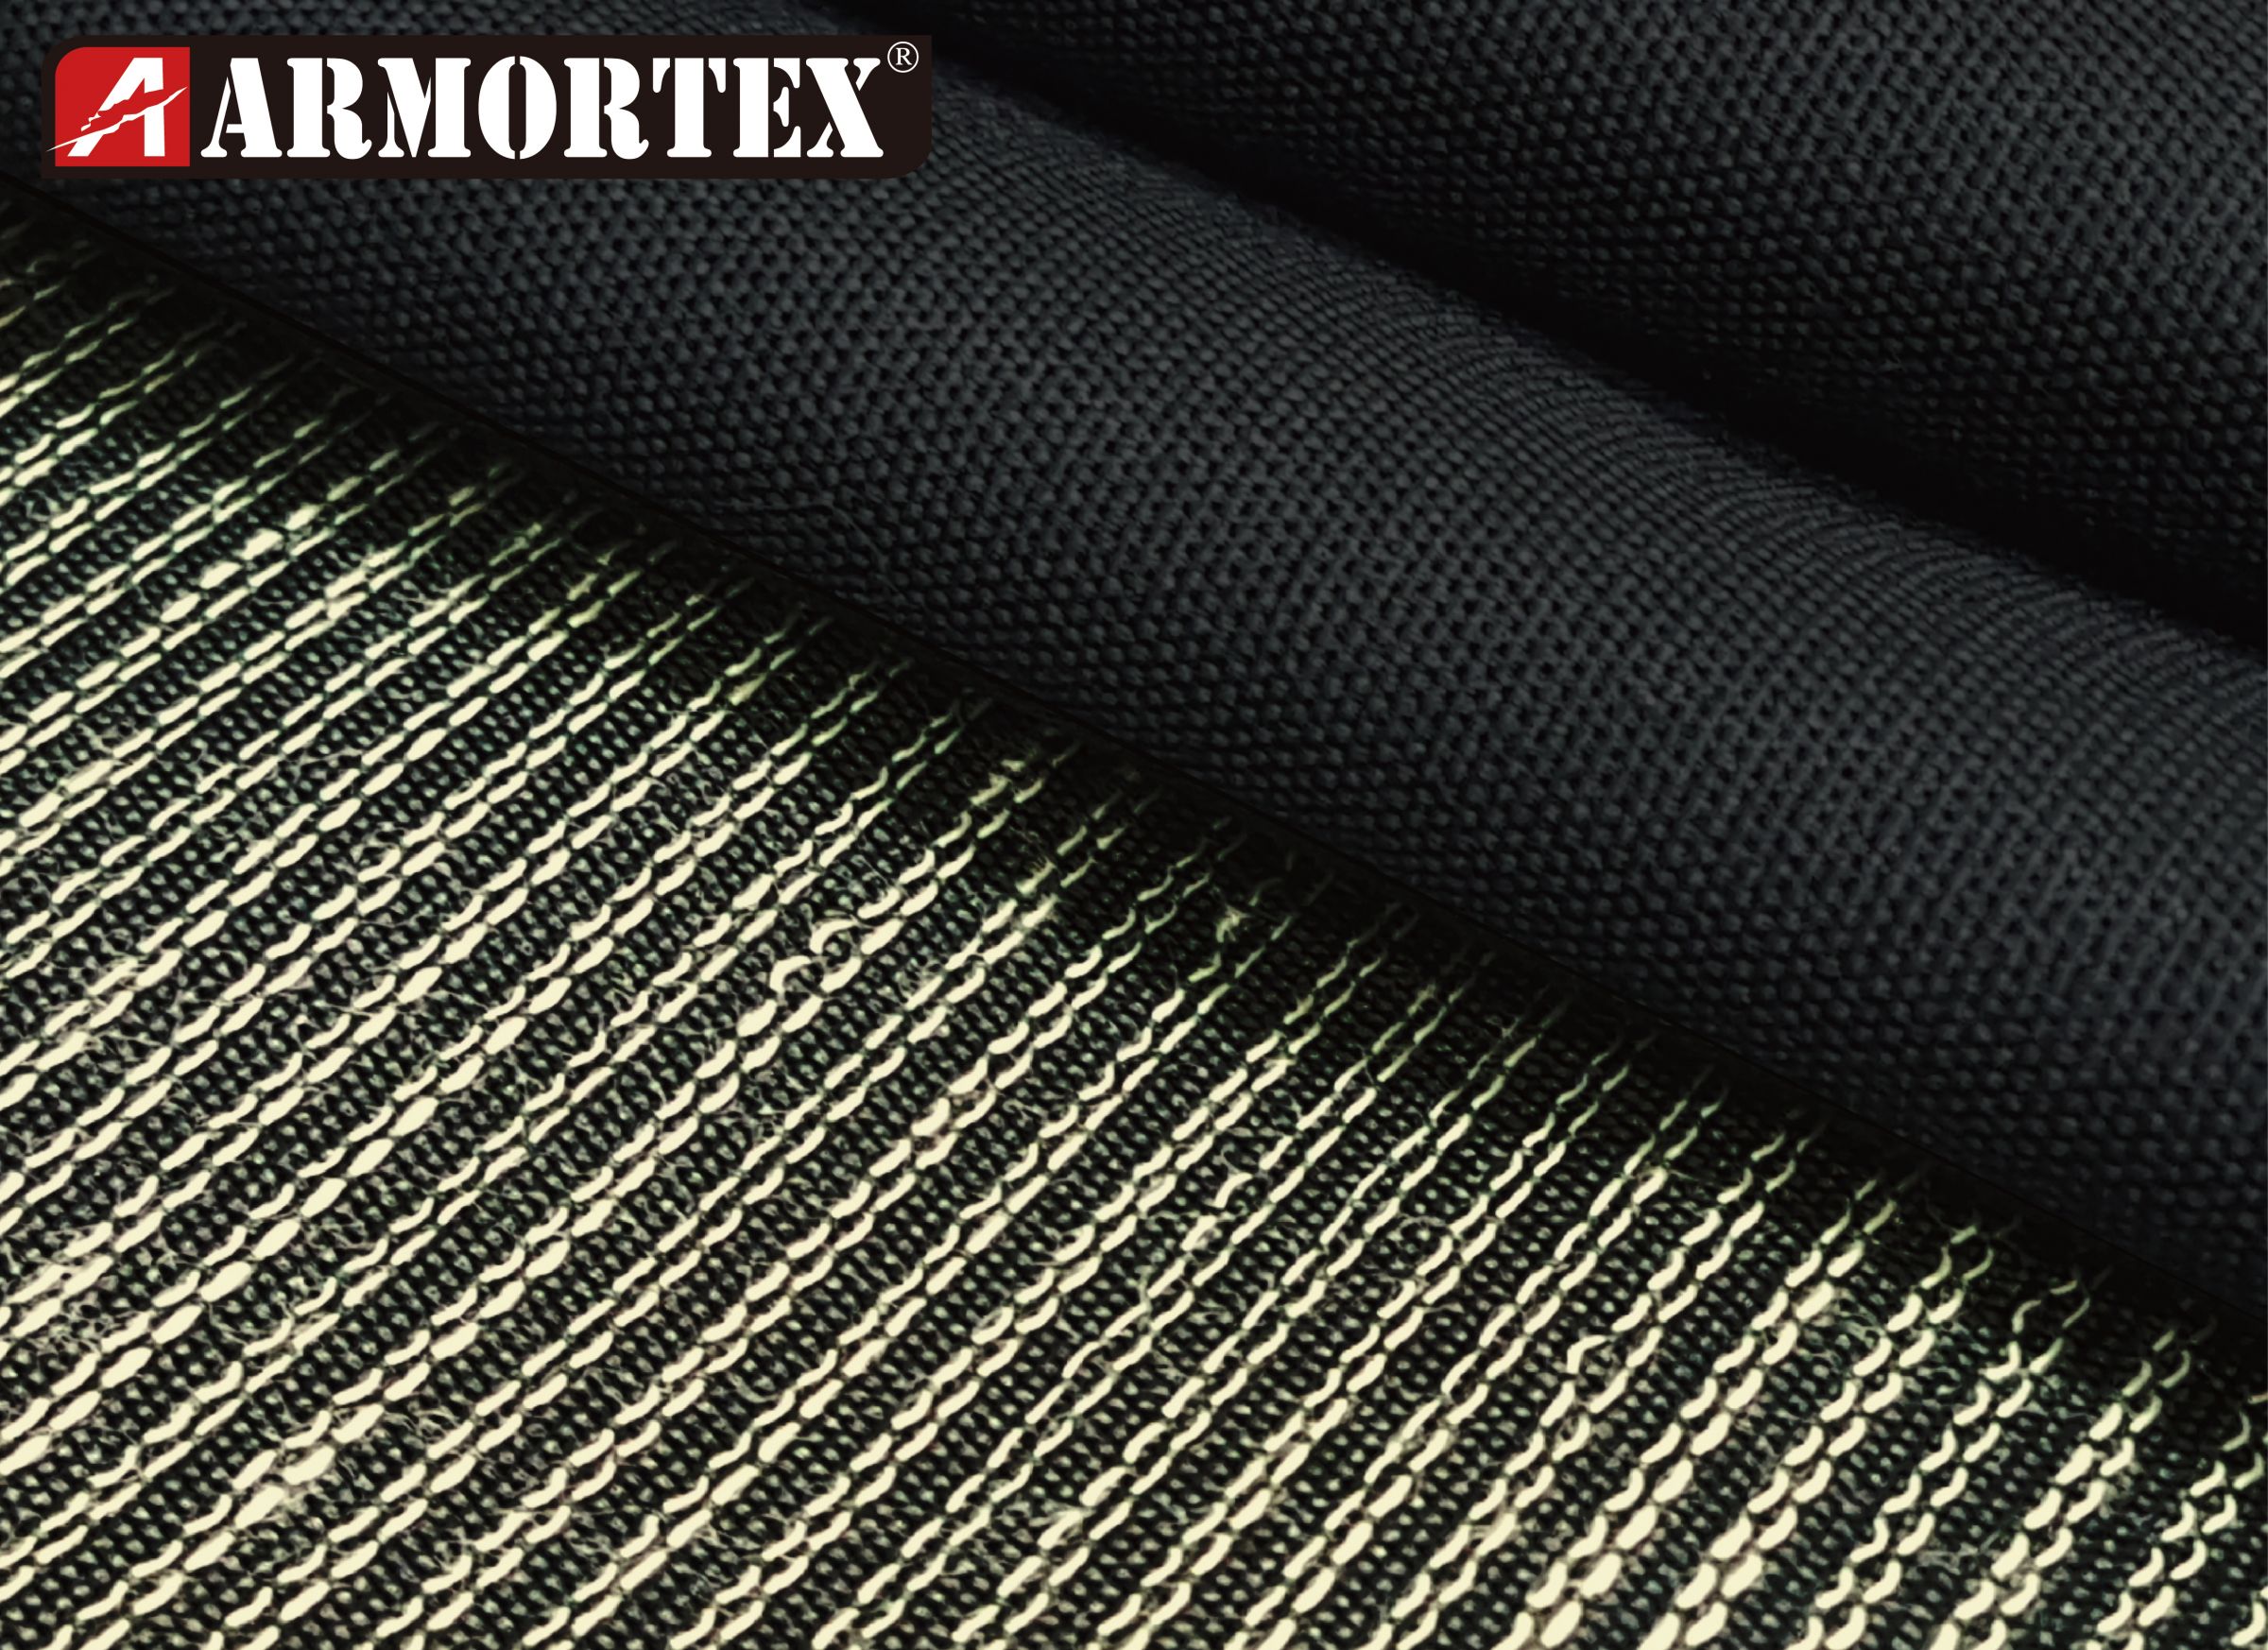 Abrasion Resistant Woven Coated Fabric Made with Kevlar® Nylon